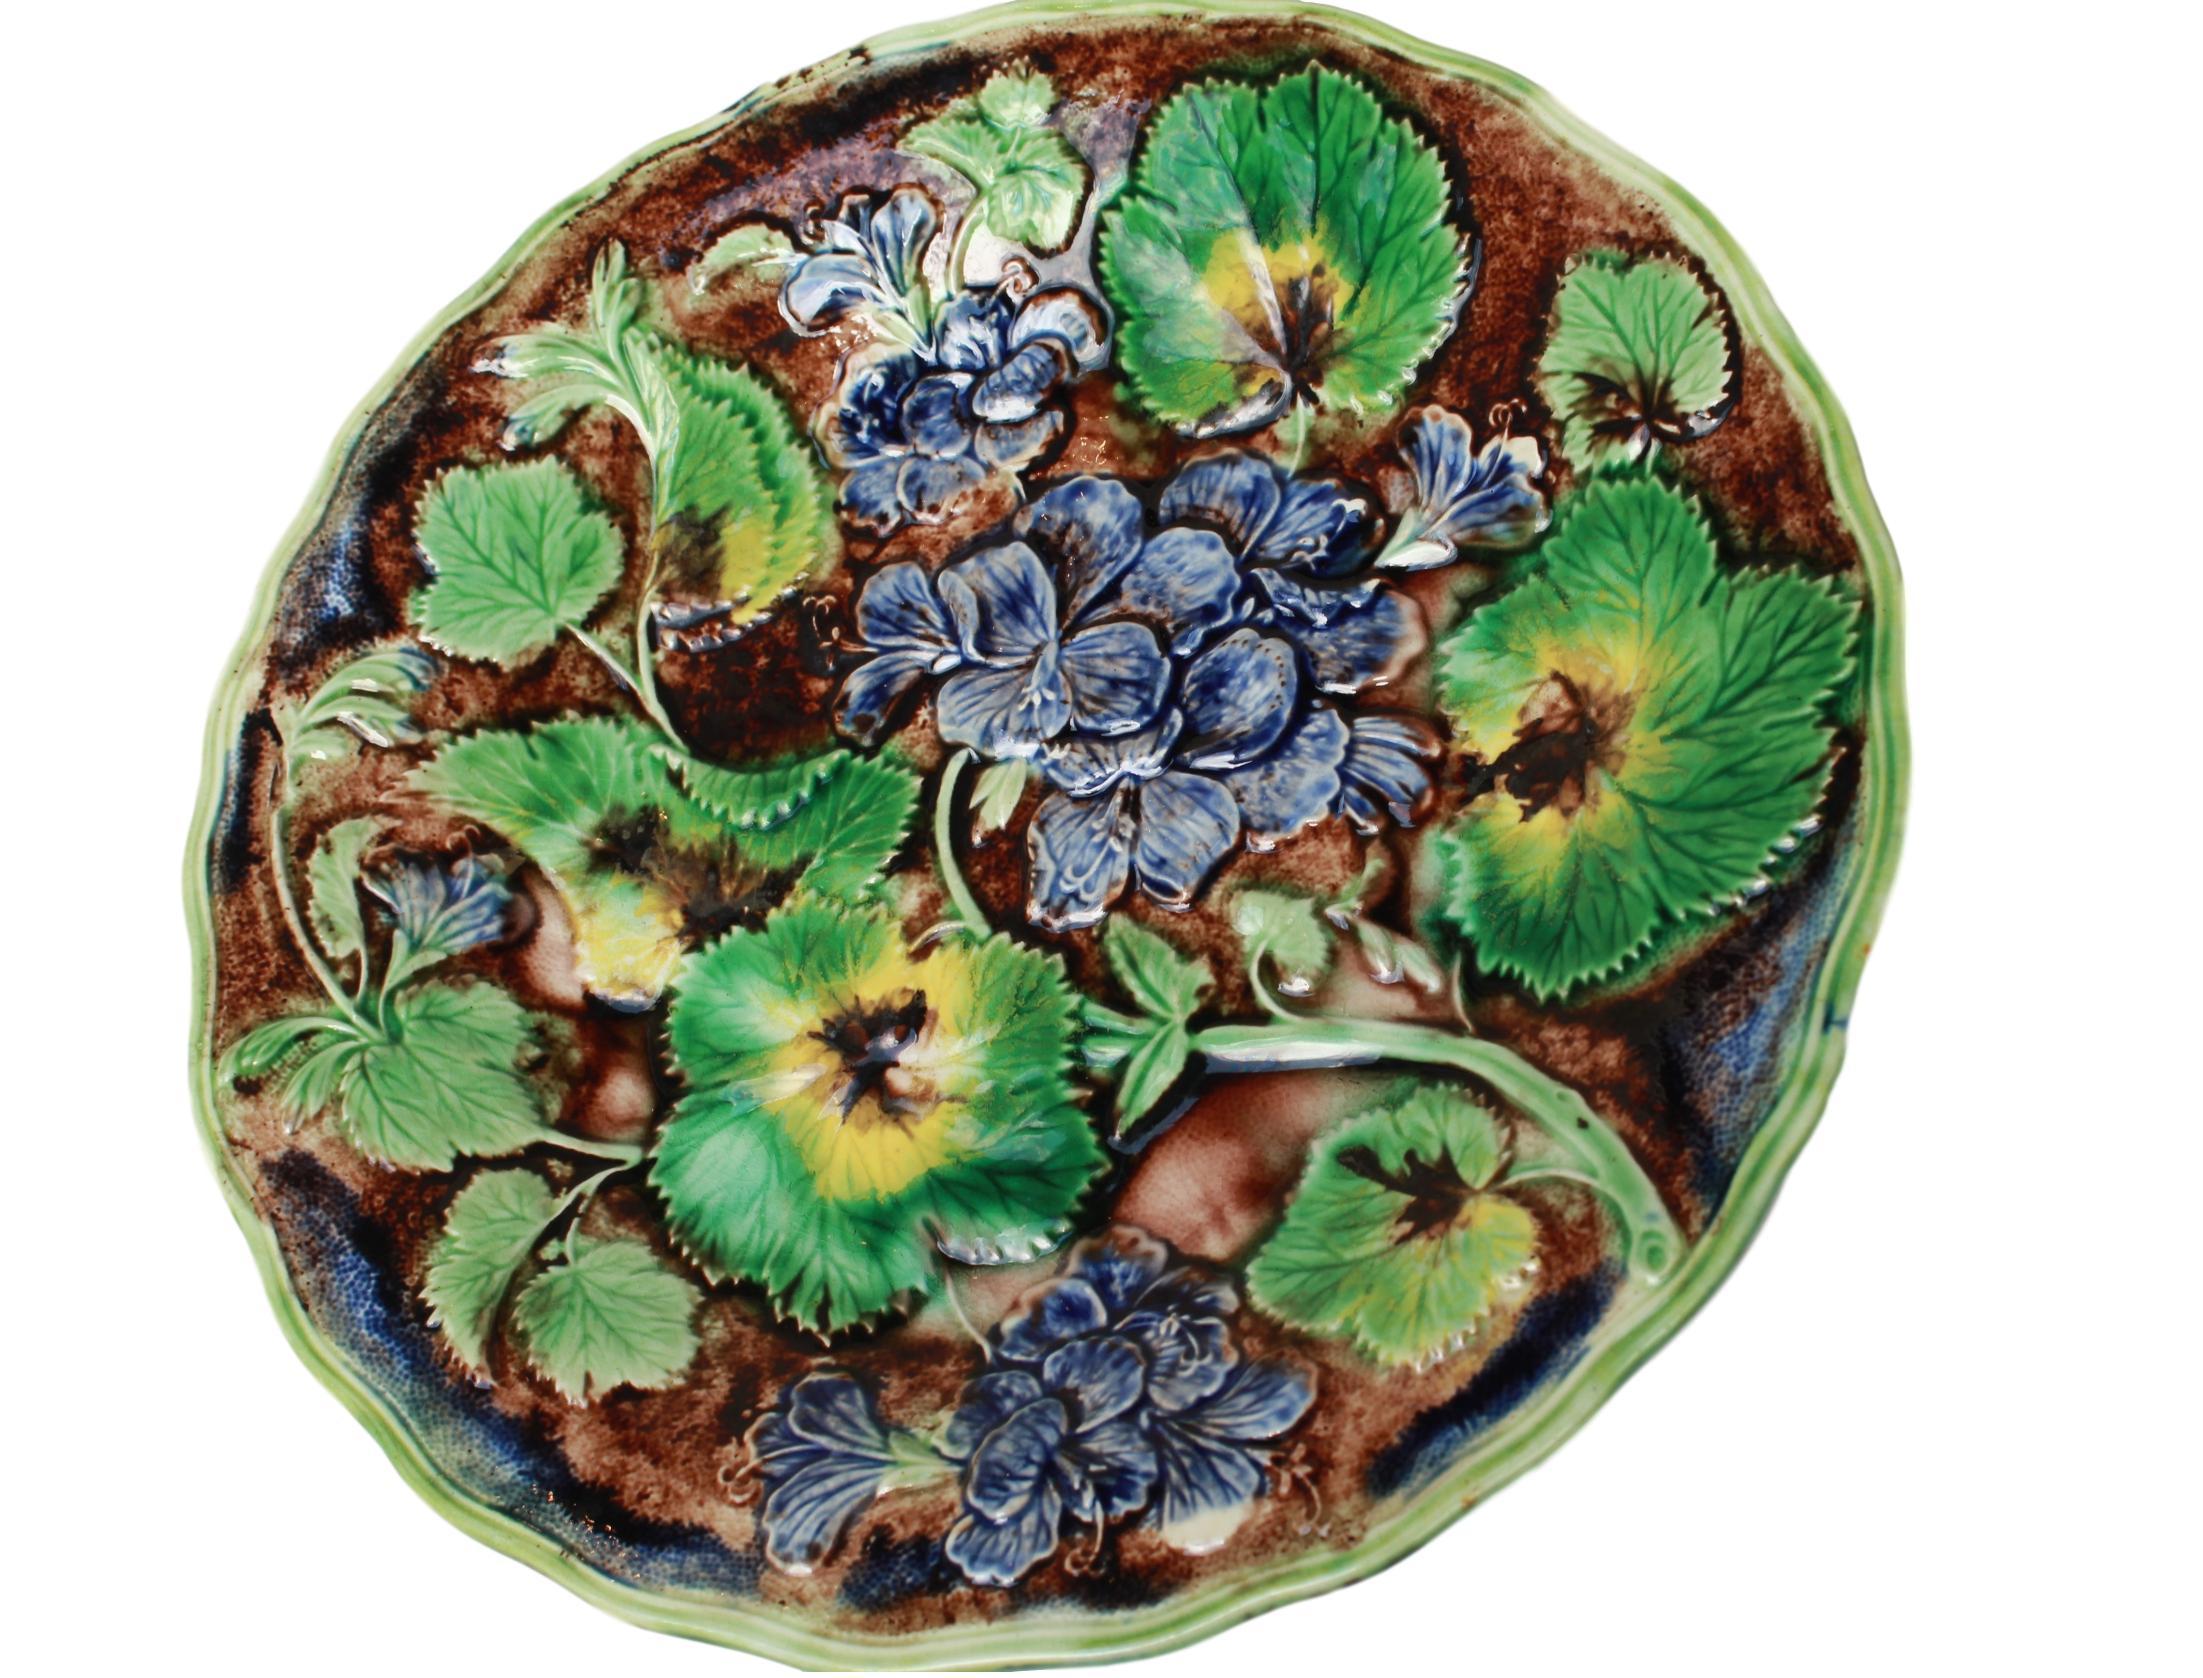 Samuel Alcock & Co. Majolica purple glazed geraniums plate, English, circa 1860, molded with purple glazed geranium blossoms, stems and leave glazed in green, yellow and brown, reserved on a faux bois ground within a shaped green glazed rim.
In